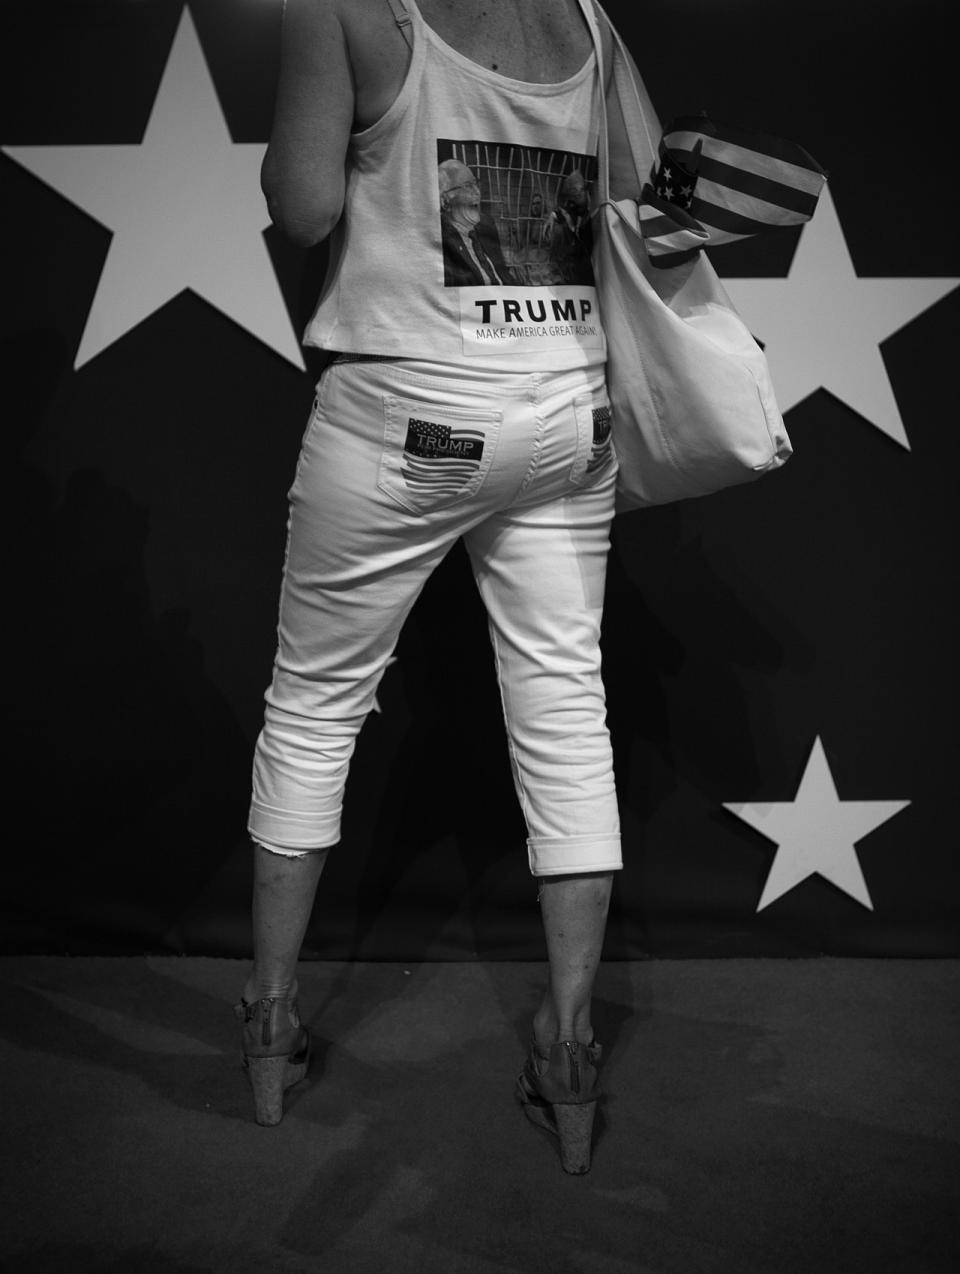 <p>Trump supporter at the Republican National Convention Thursday, July 21, 2016, in Cleveland, OH. (Photo: Khue Bui for Yahoo News)</p>